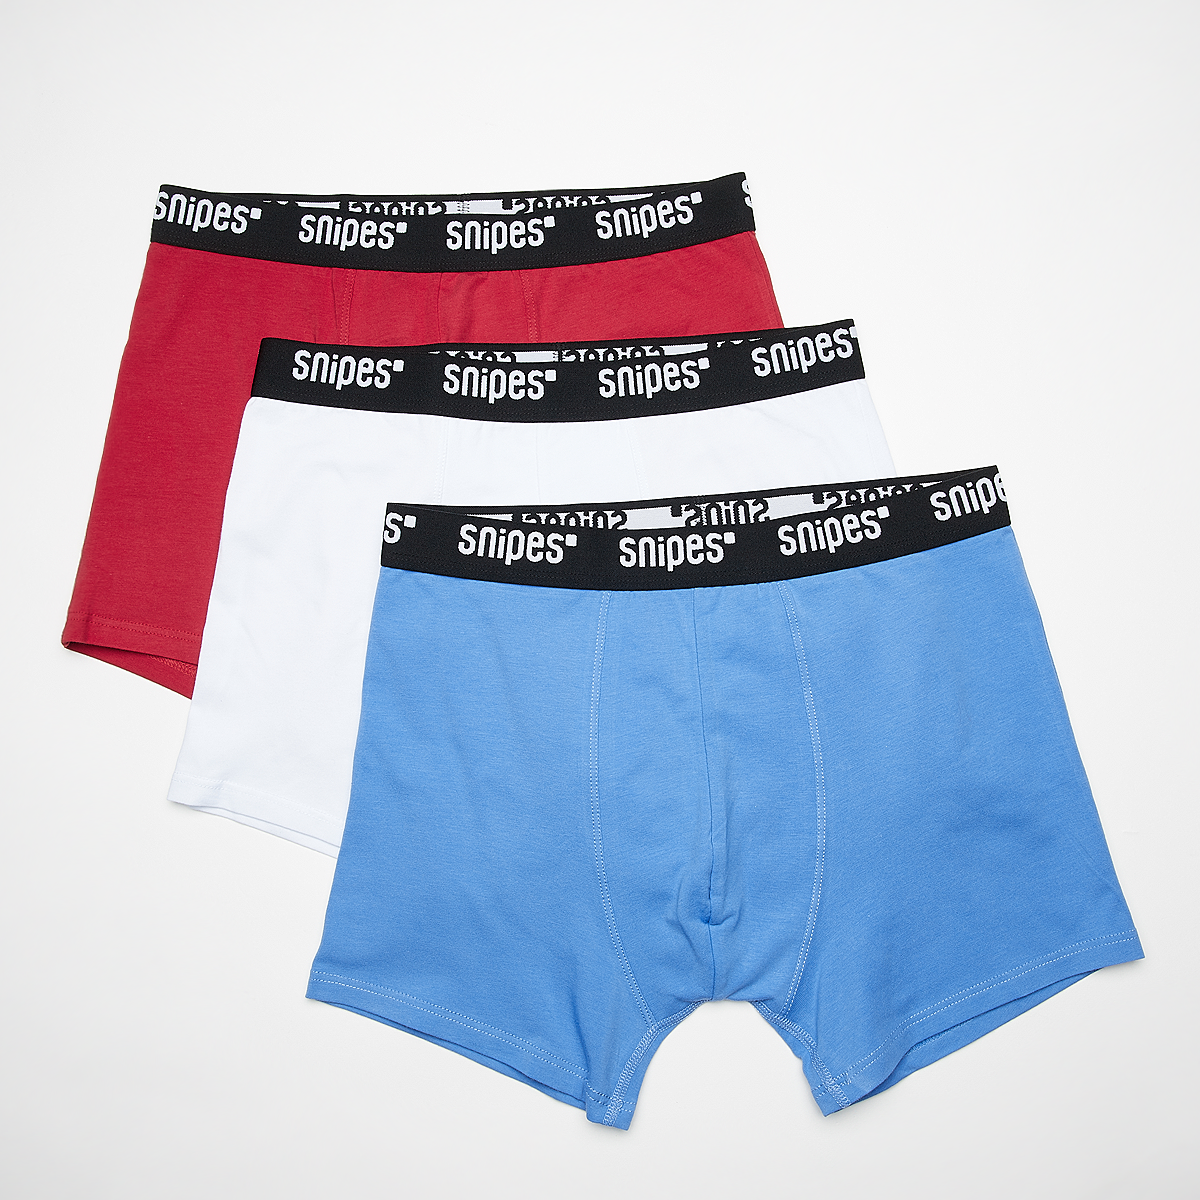 Black Tape Briefs Boxershorts (3 Pack) product